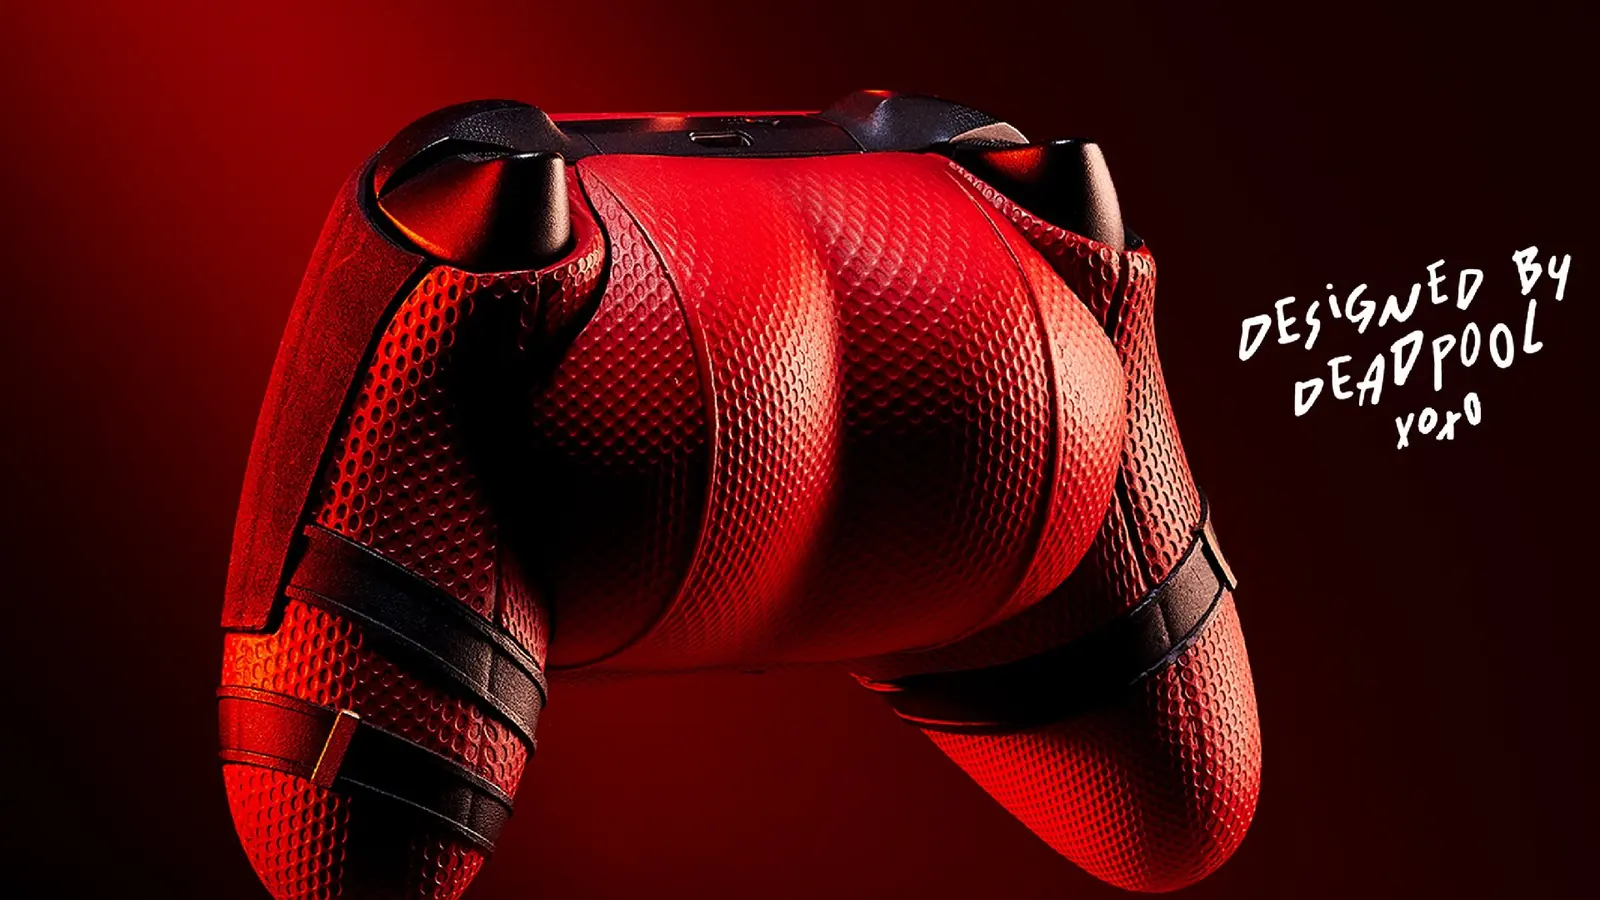 A limited-edition Xbox controller 'designed by Deadpool' showcasing the characters' butt on the back of it.